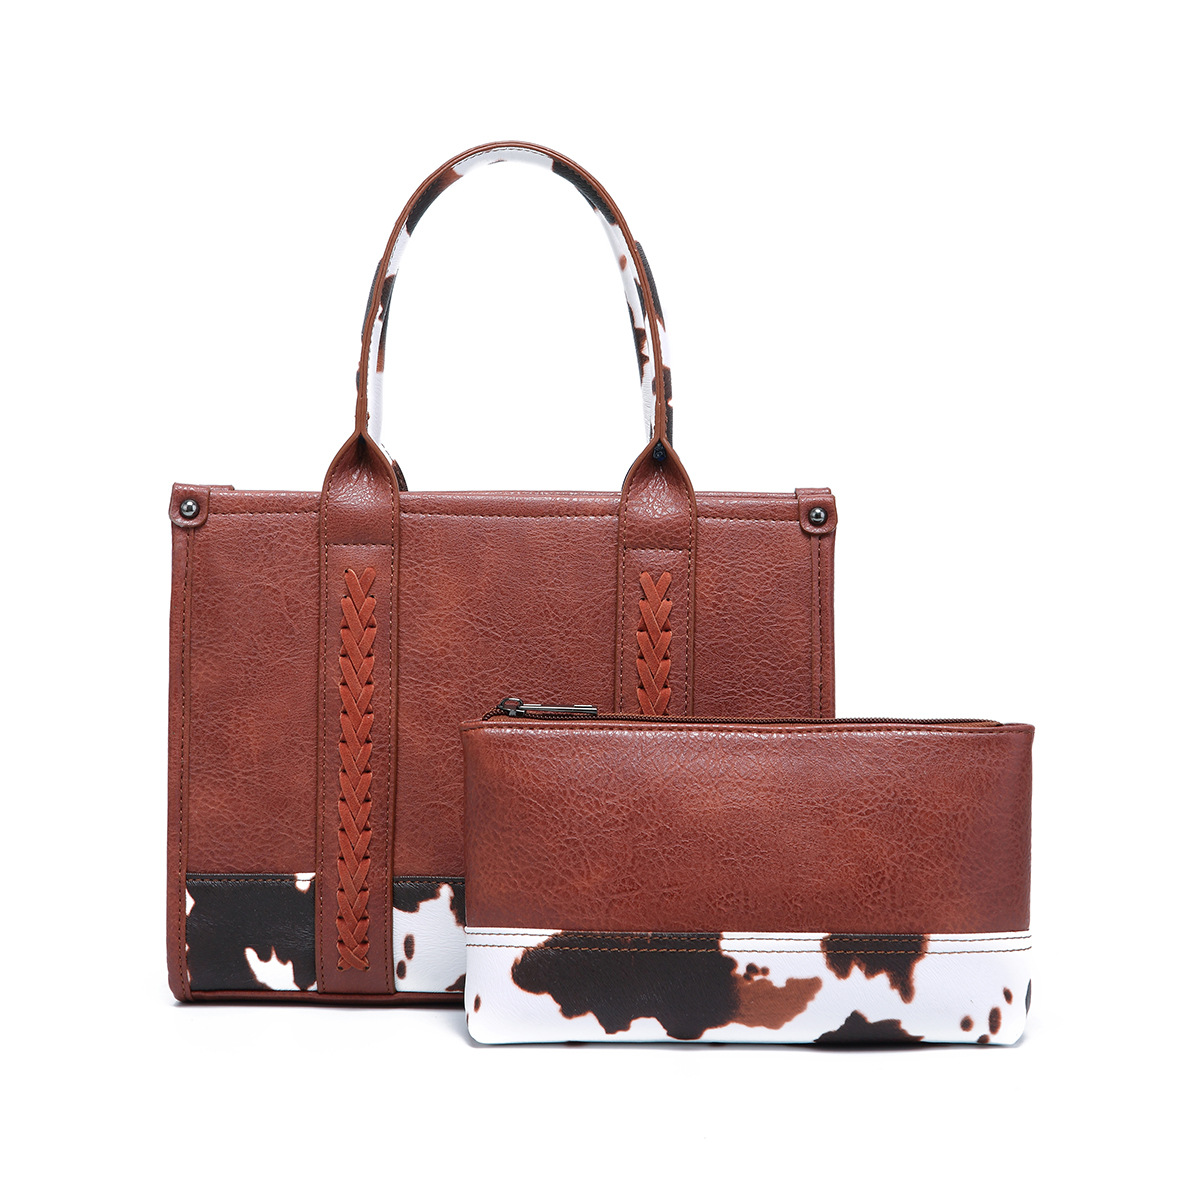 PG5019 Brown and Clutch bag